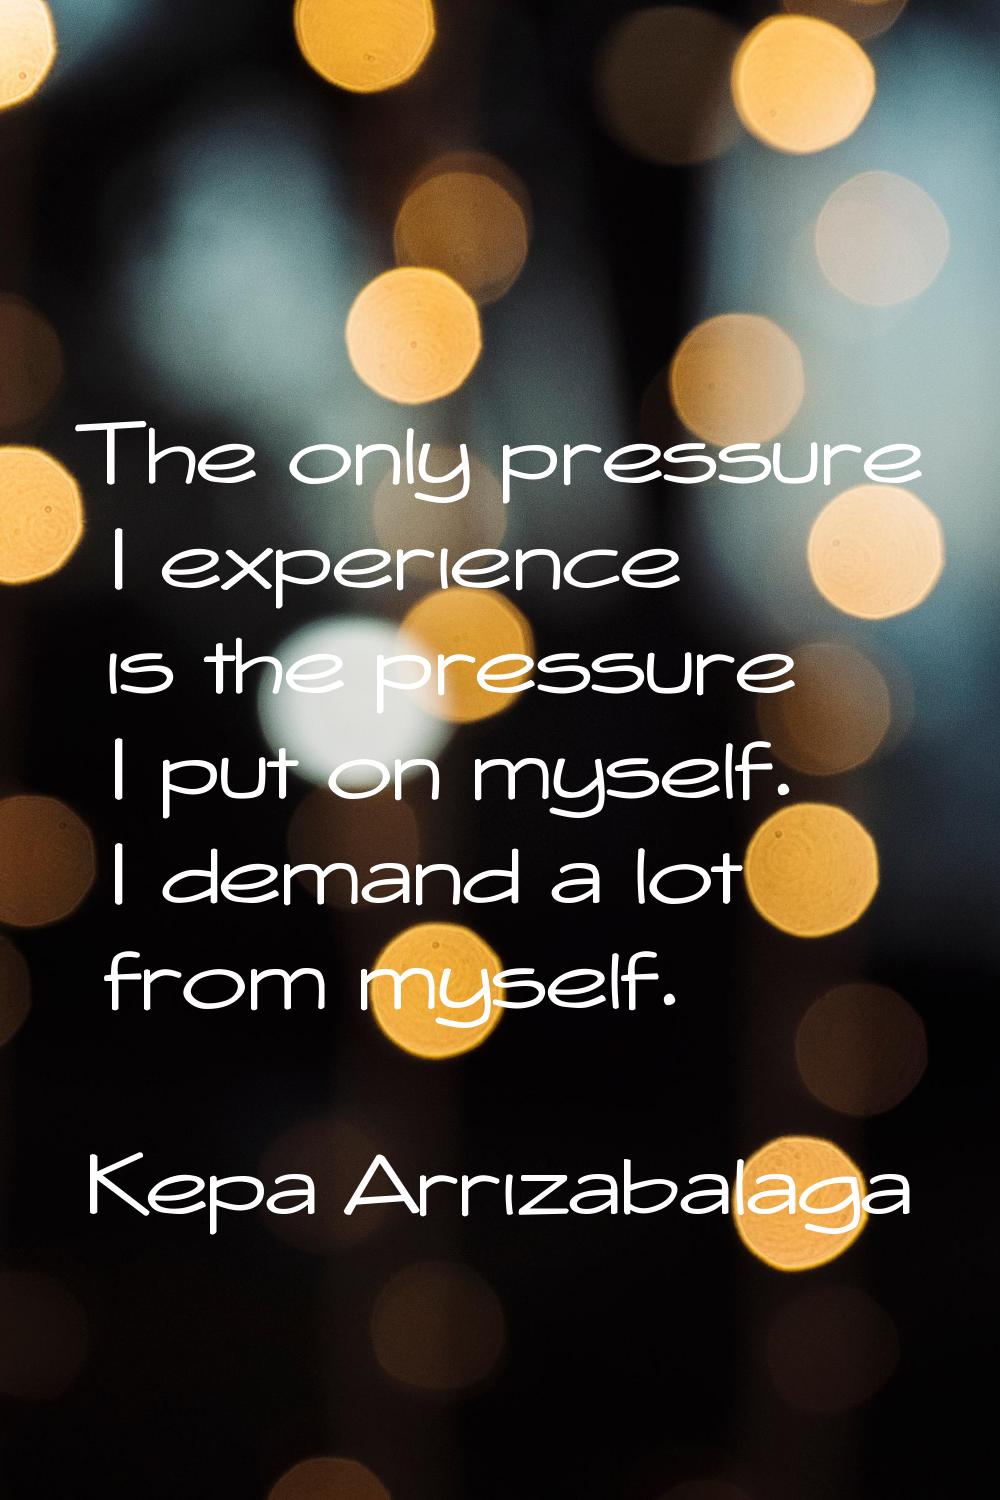 The only pressure I experience is the pressure I put on myself. I demand a lot from myself.